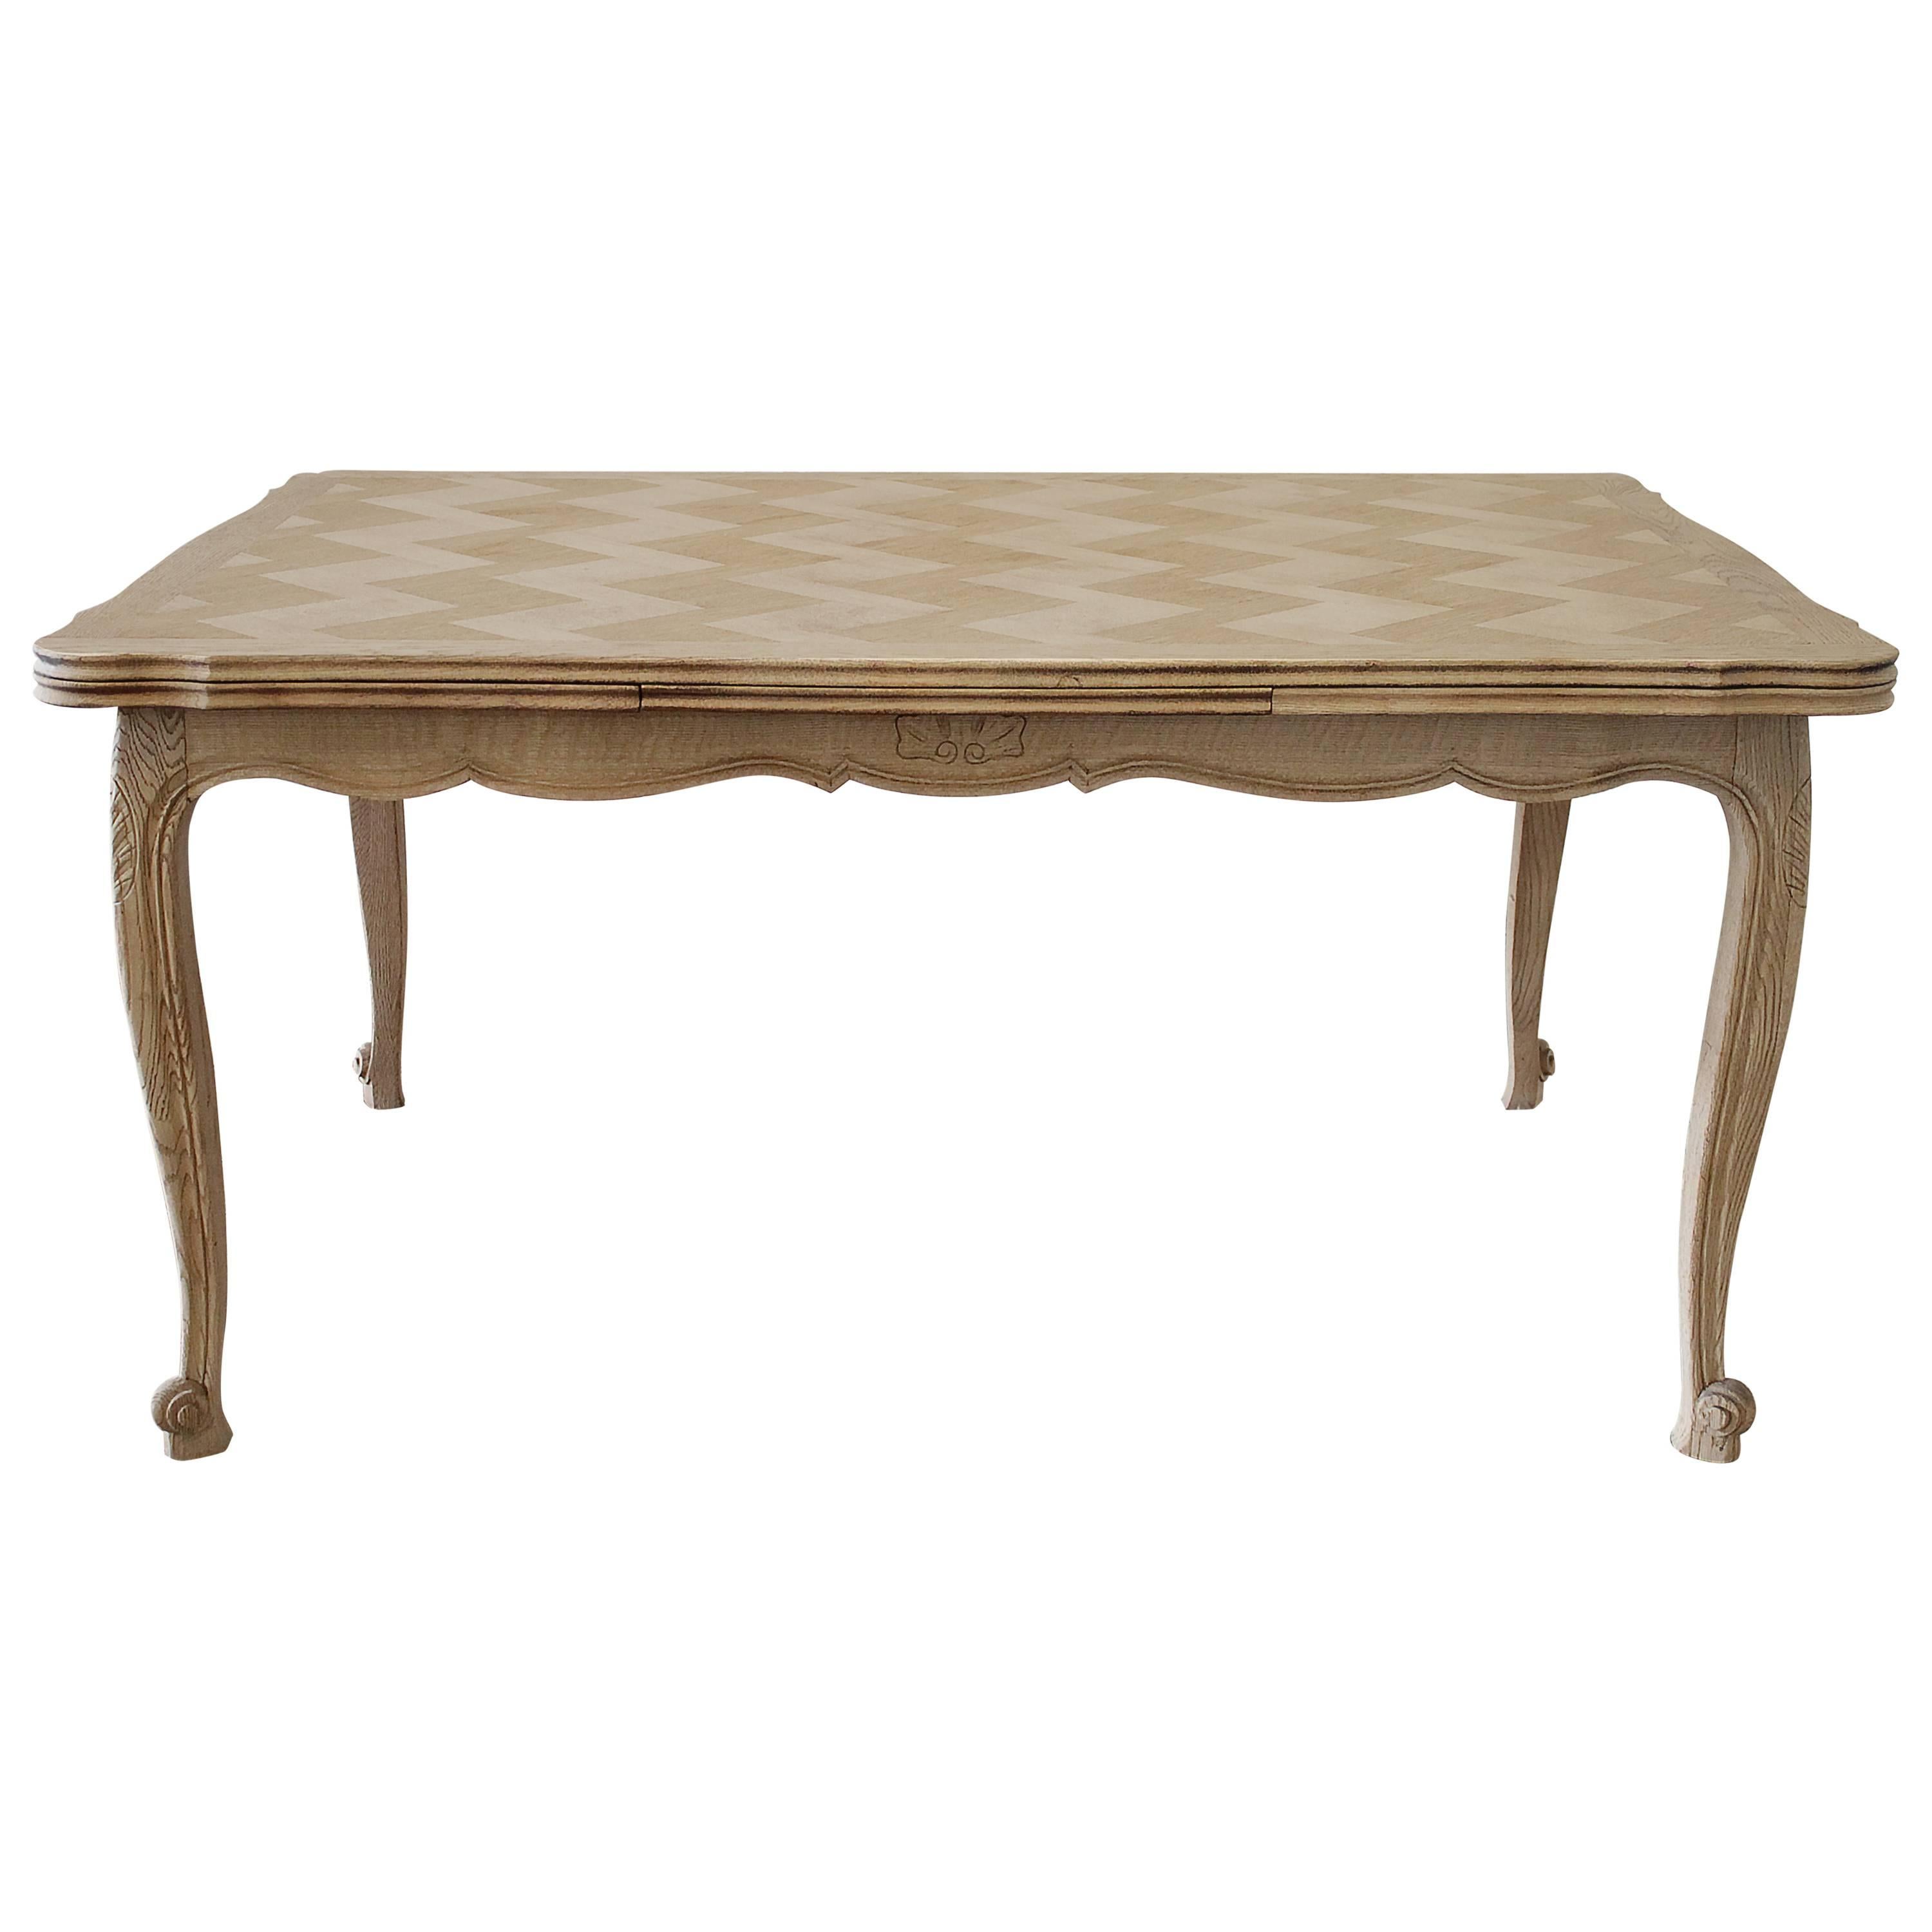 French Oak Draw-Leaf Dining Table with Parquetry Top